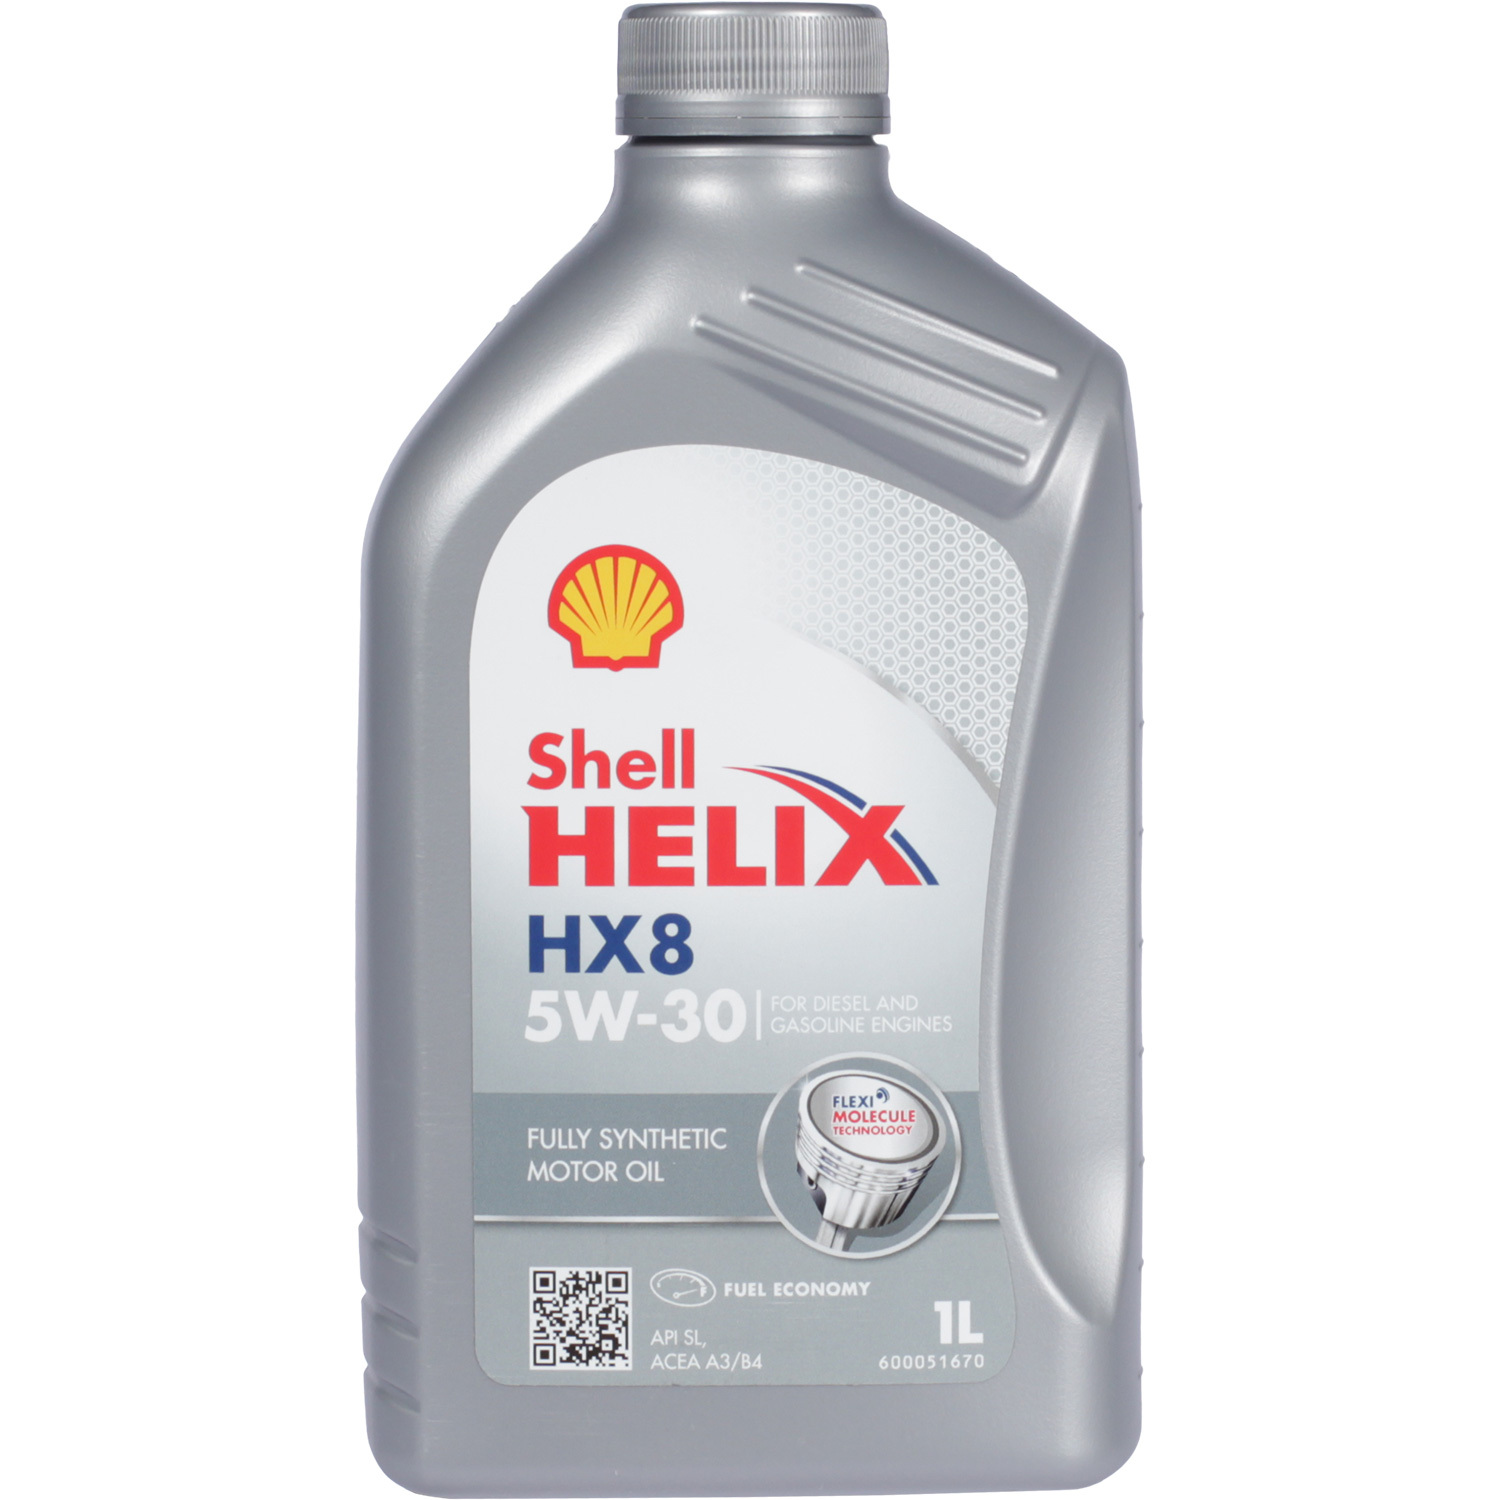 Shell Моторное масло Shell Helix HX8 5W-30, 1 л shell моторное масло shell helix hx8 5w 40 1 л